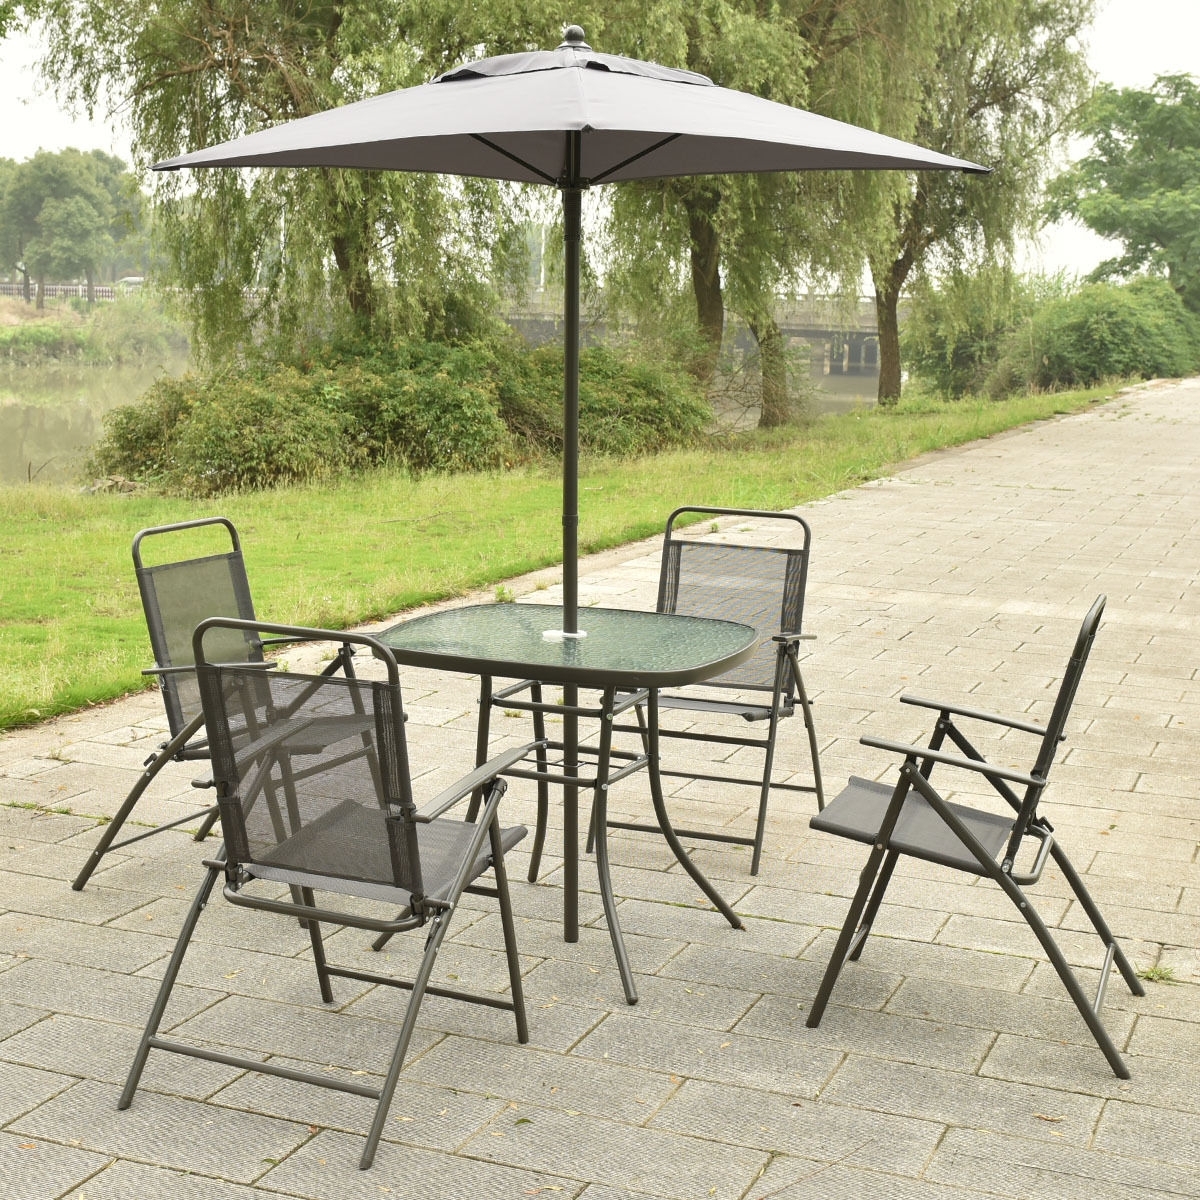 Patio Set With Umbrella And 4 Chairs